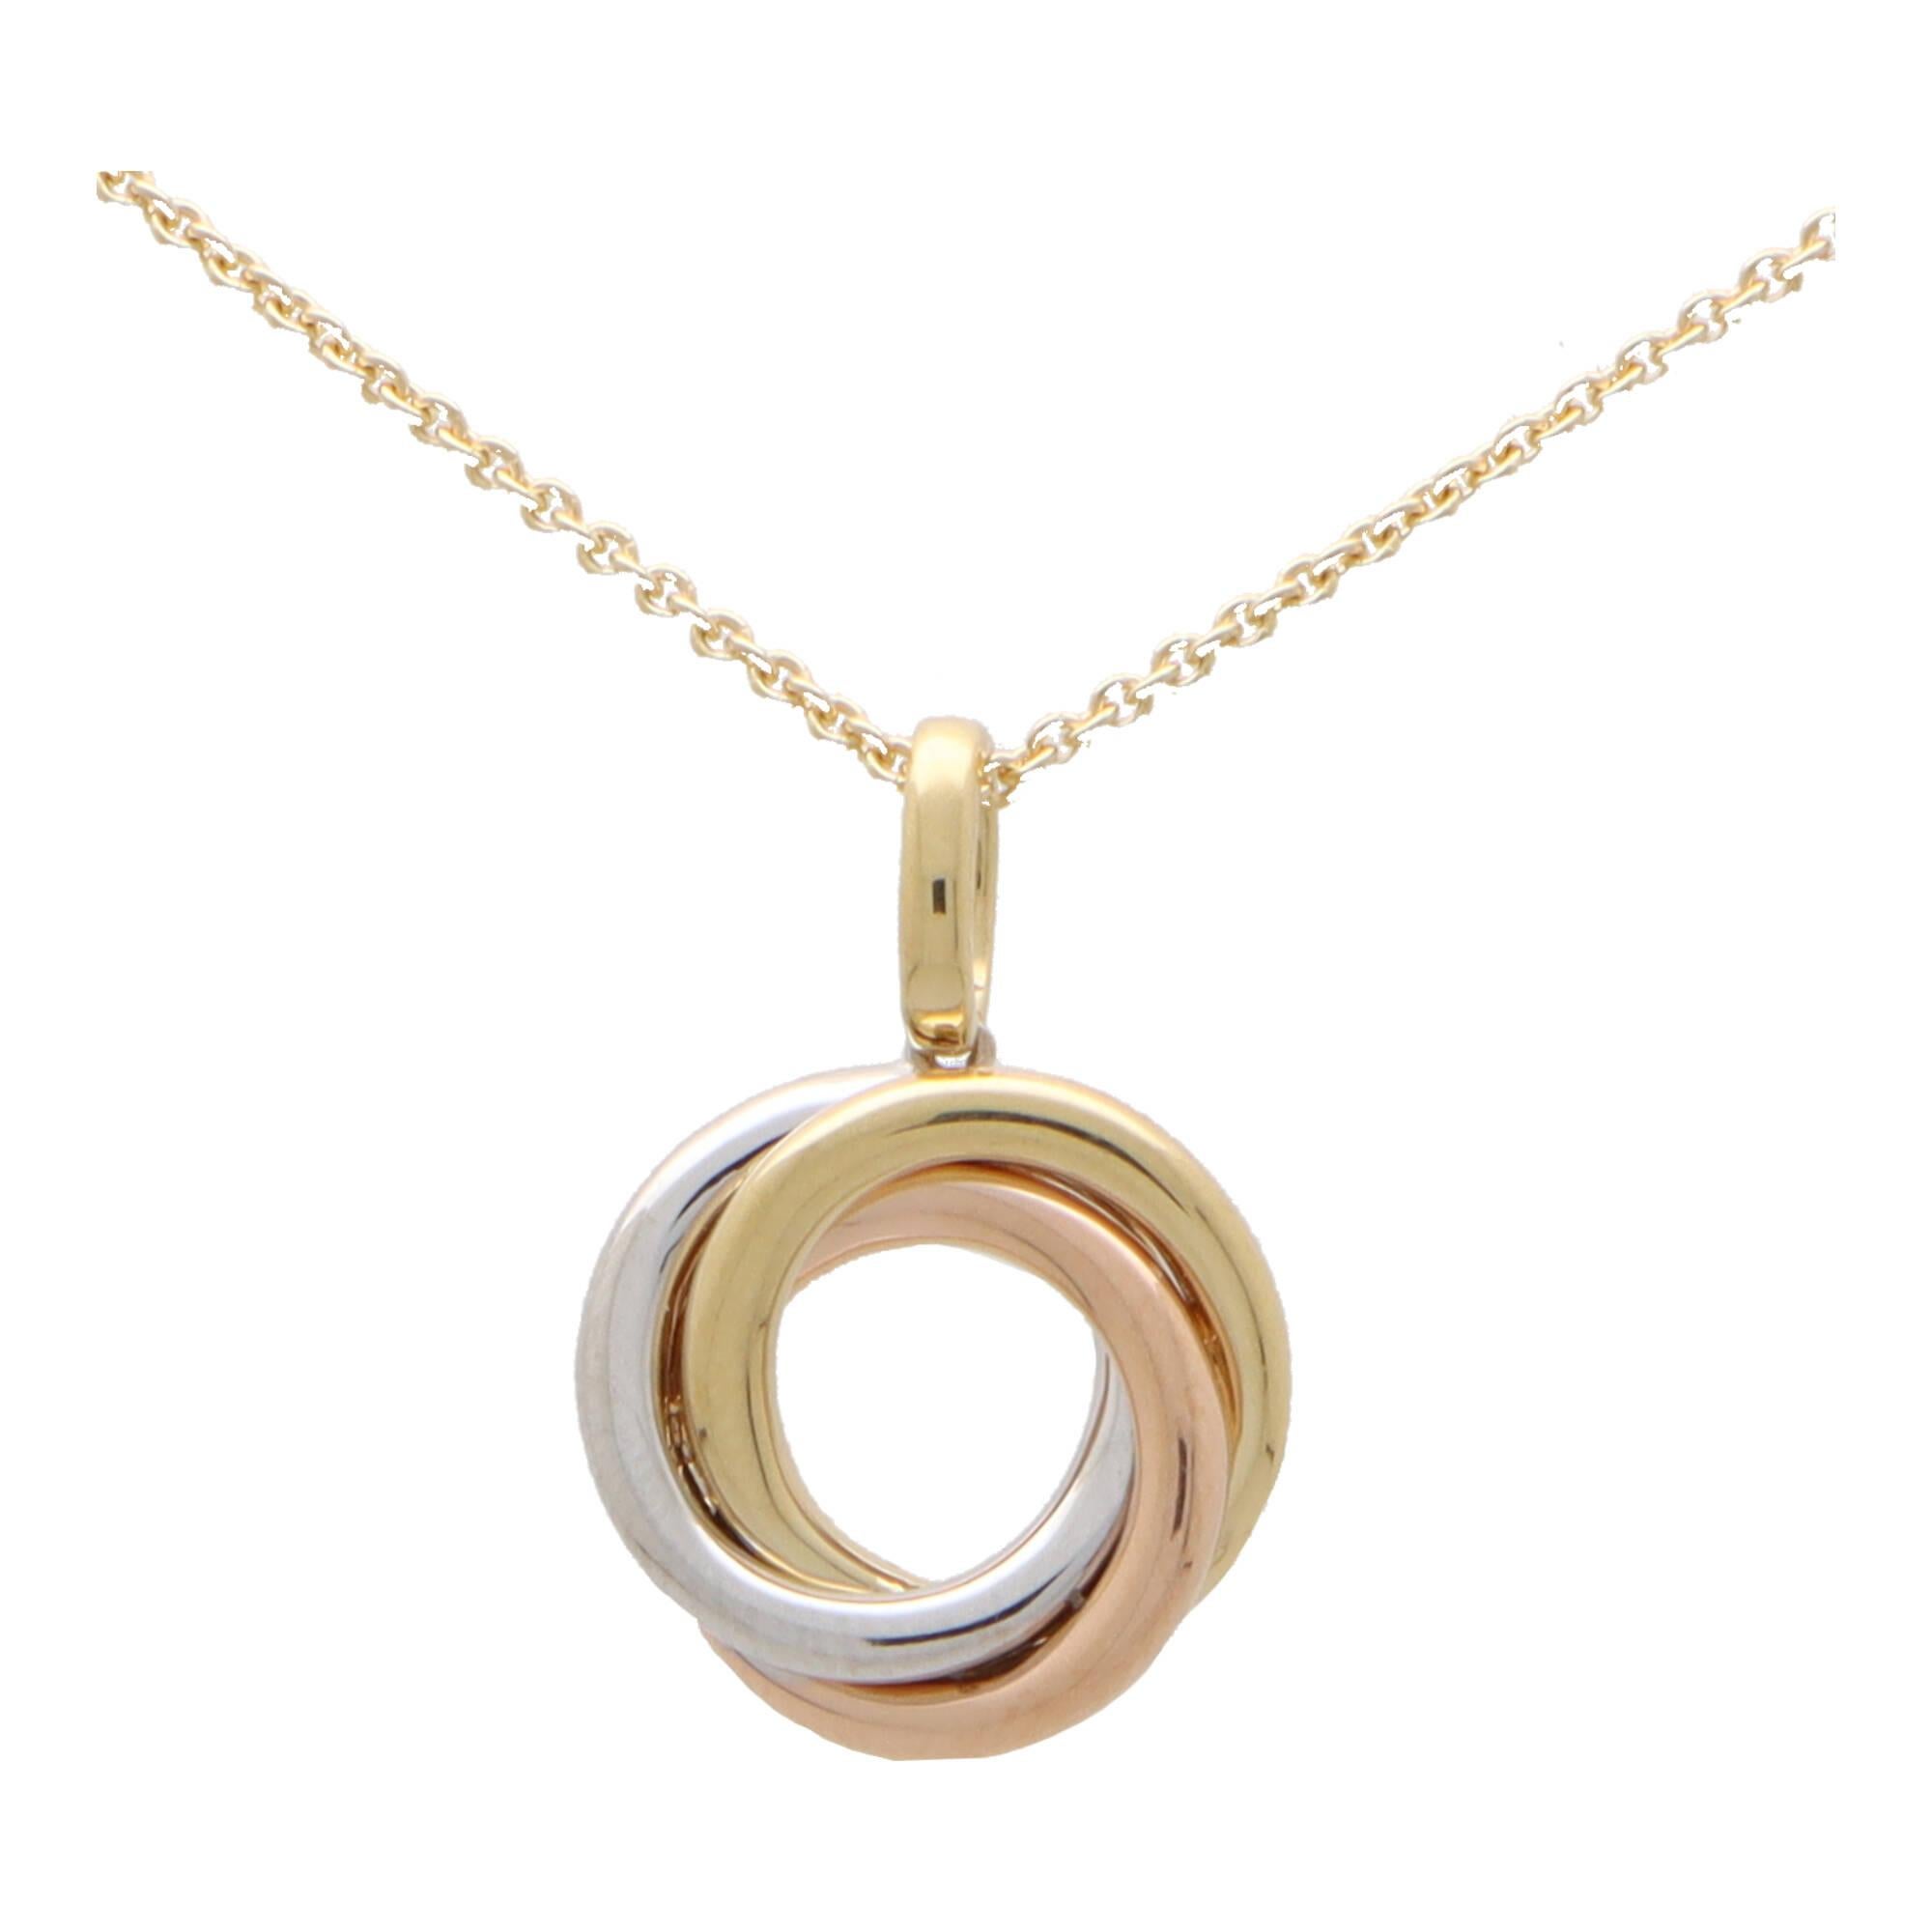  A classic trinity ring pendant necklace set in 18k yellow, rose and white gold. 

This iconic pendant design is composed of three tri-coloured loops interlocked into one pendant. It hangs from a yellow gold bail on a 16-18-inch yellow gold trace